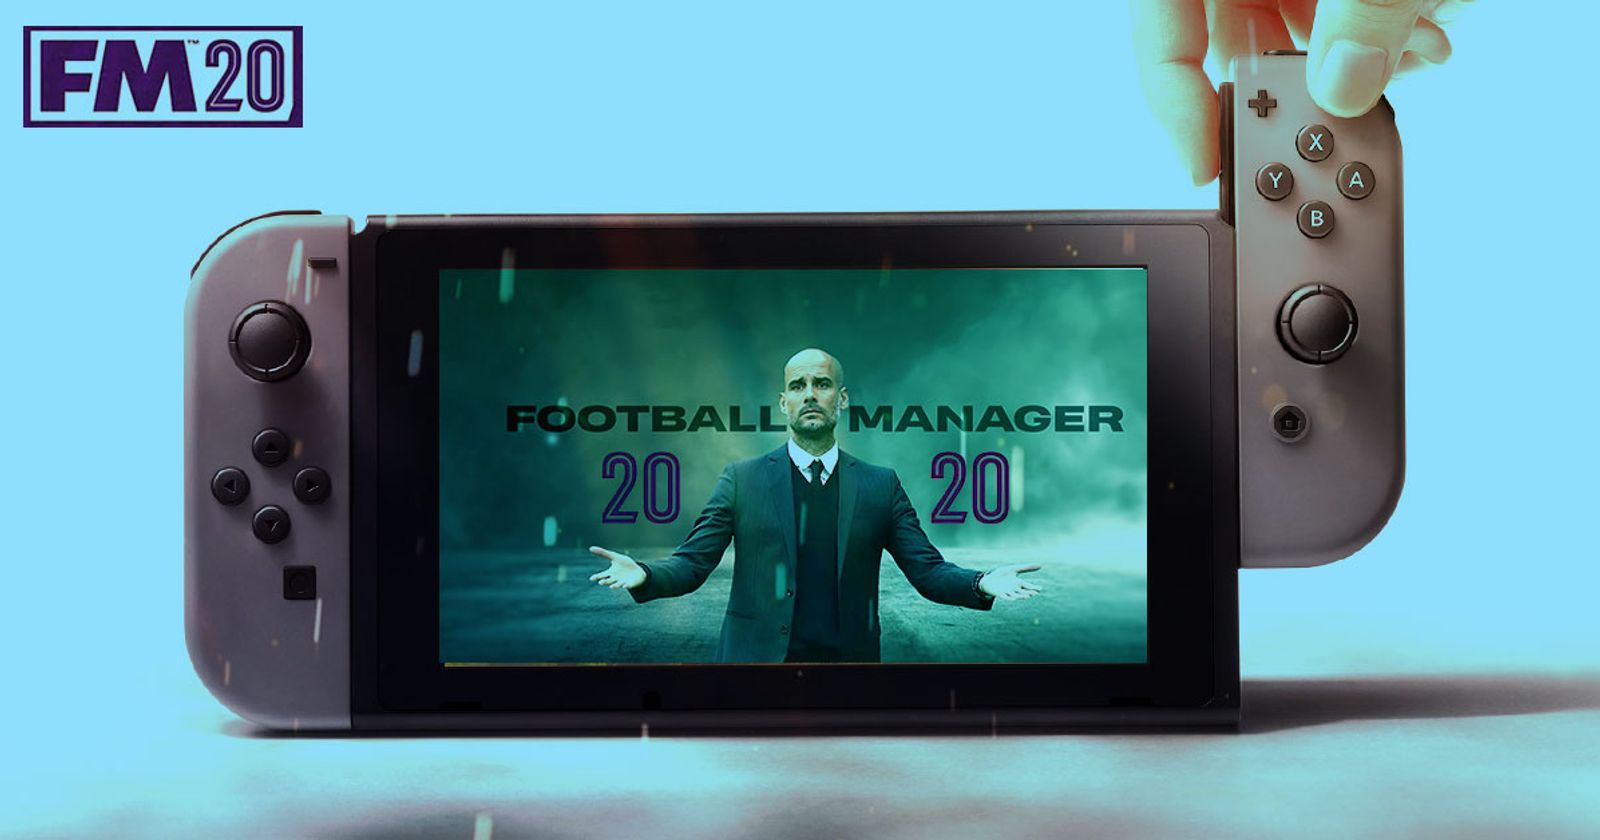 Football Manager 2020 Touch Available Now For Nintendo Switch